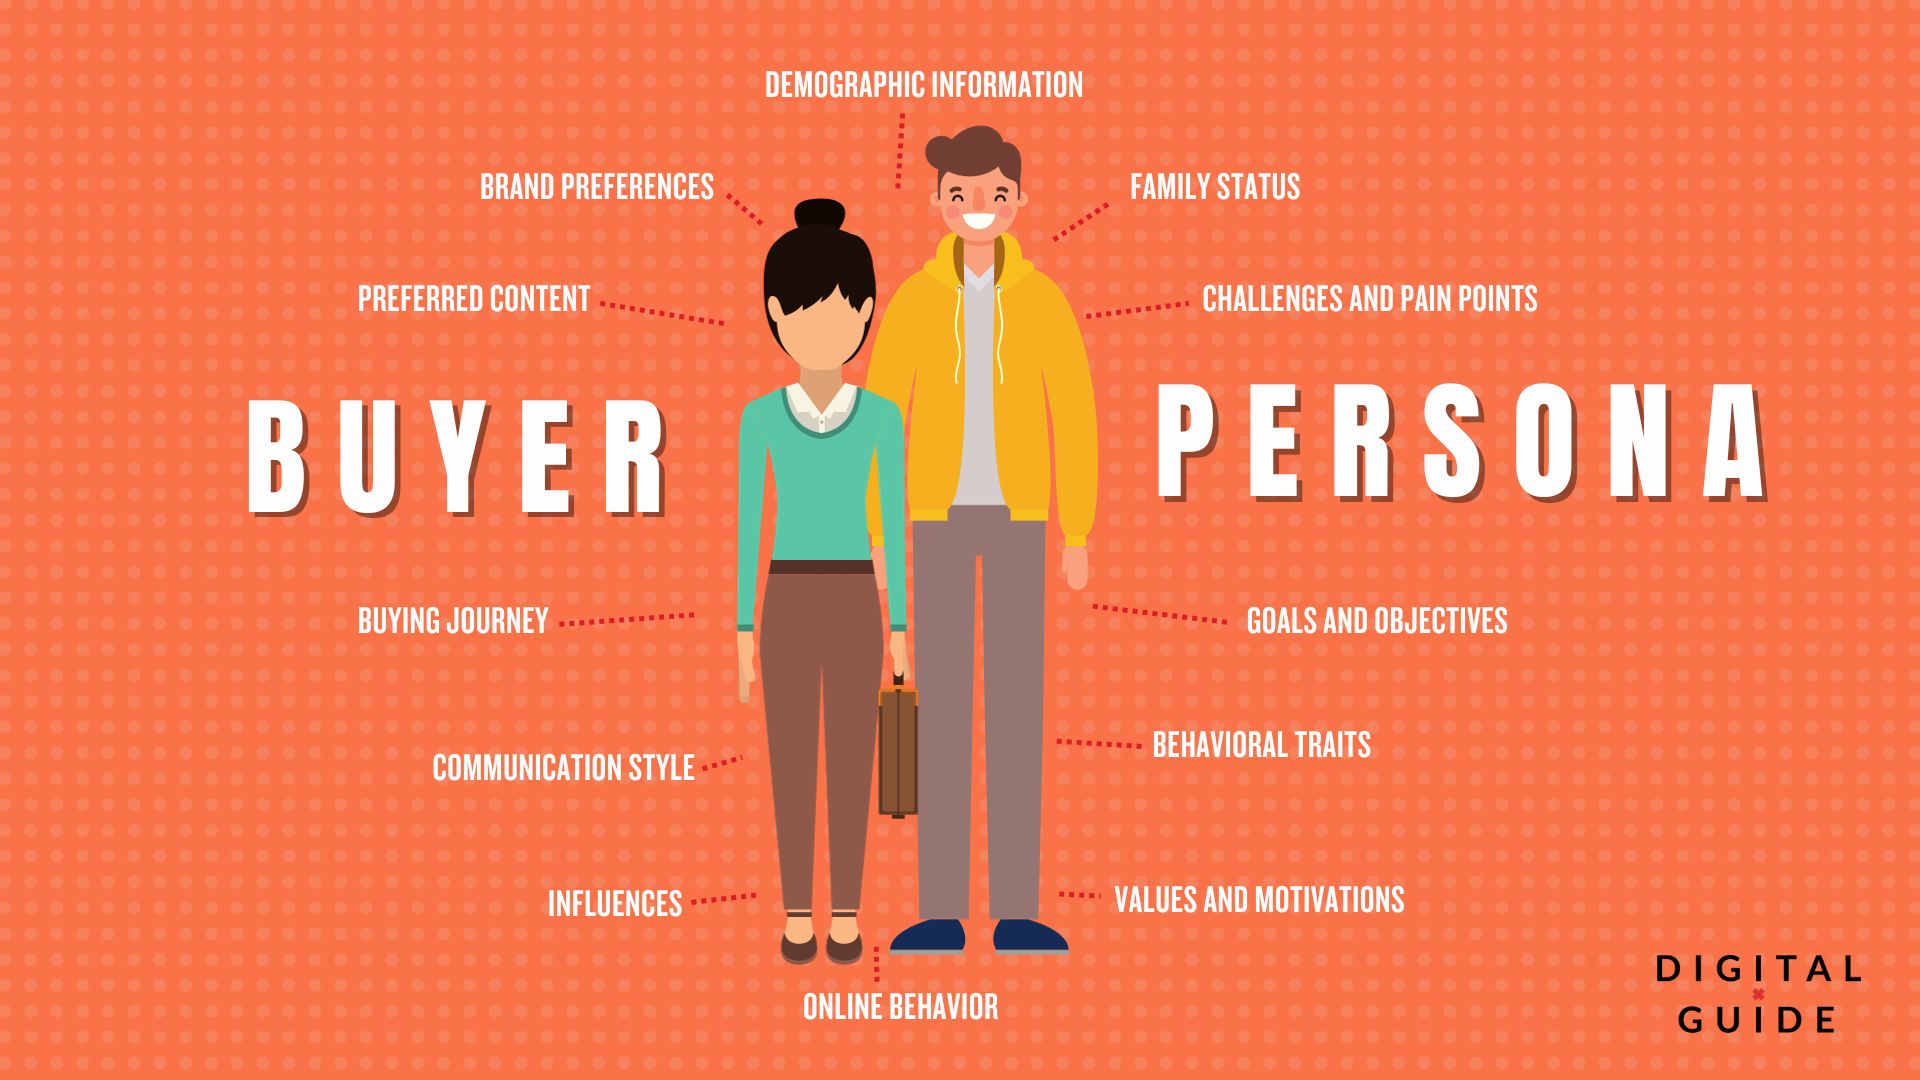 A man and a woman standing between the words 'Buyer Persona' with surrounding labels including Demographic information, family status, challenges, goals and objectives, behavioral traits, values, online behavior, influences, buying journey, content preferences, brand preferences, and communication style